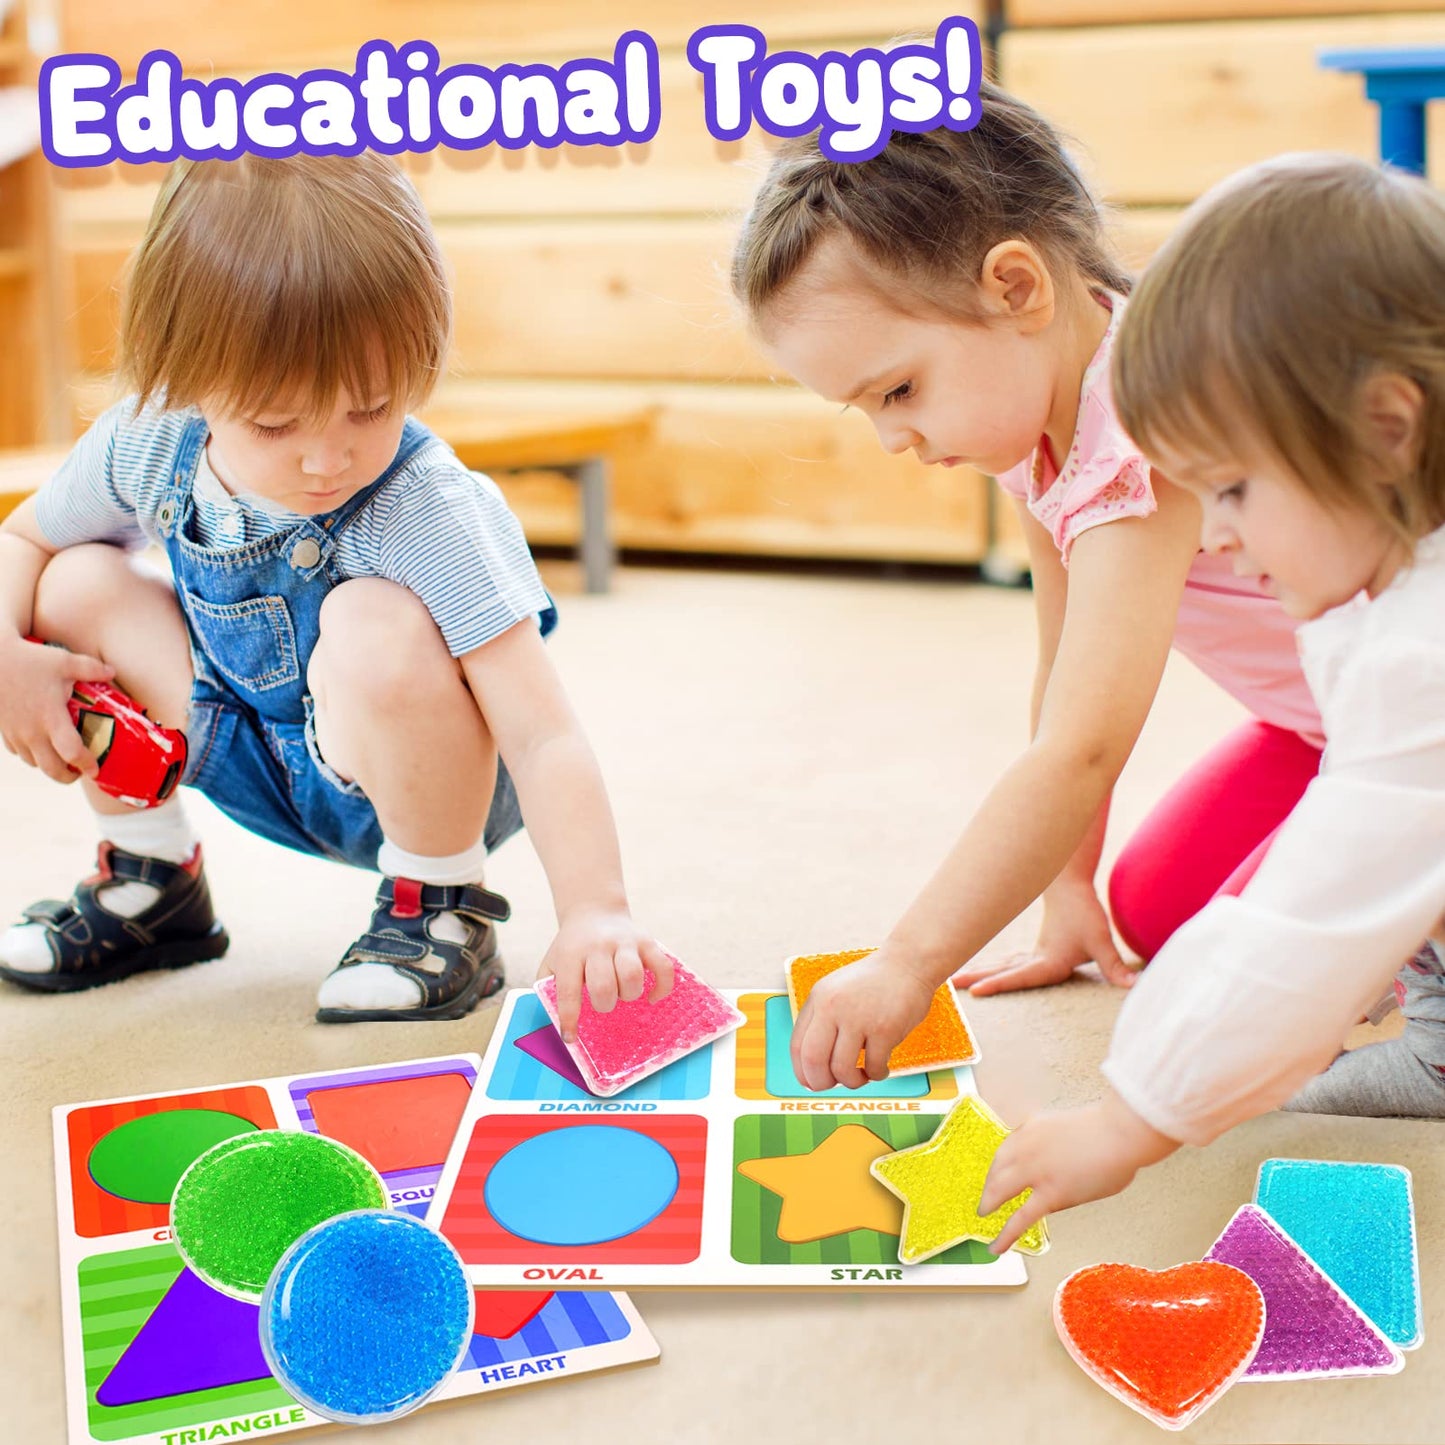 Toddlers Montessori Toy For Boys Girls 3 4 Years Old, Education Learning Colors & Shapes Sorting Toys, Water Beads Sensory Toys for Autistic Children, Preschool Fine Motor Skills Game - Kids Gifts